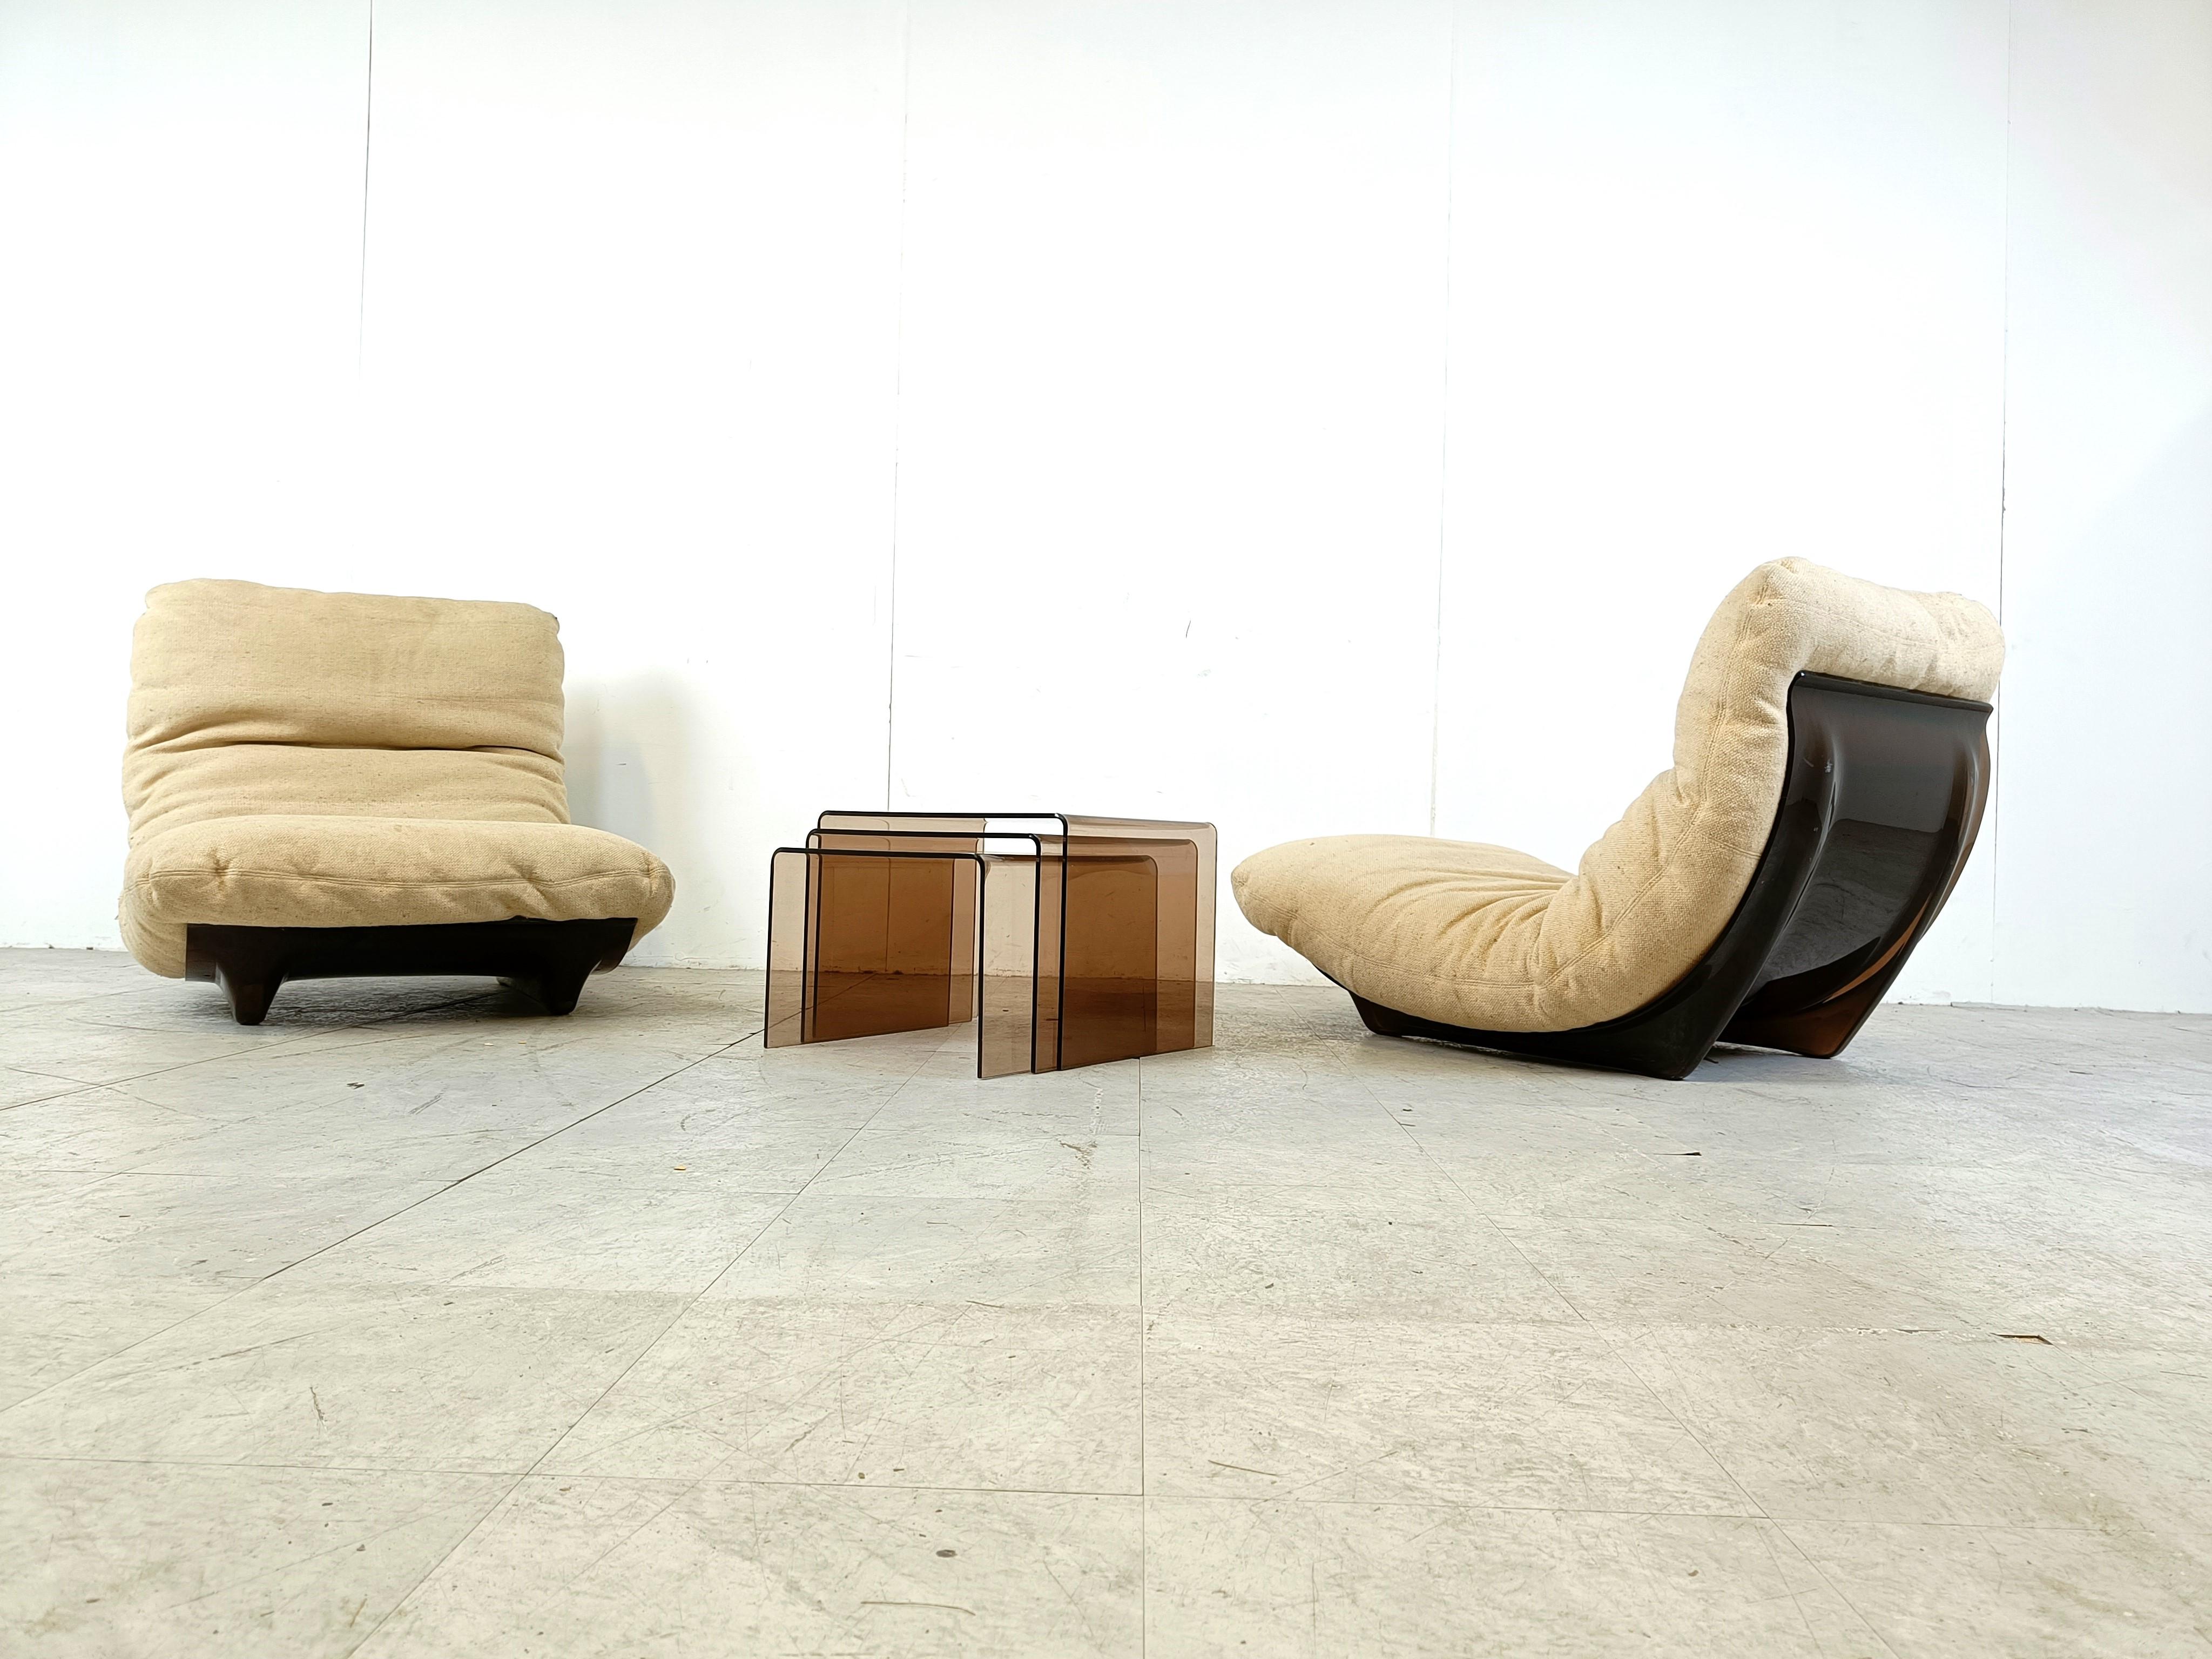 Space Age Pair of Marsala lounge chairs with matching tables by Michel Ducaroy 